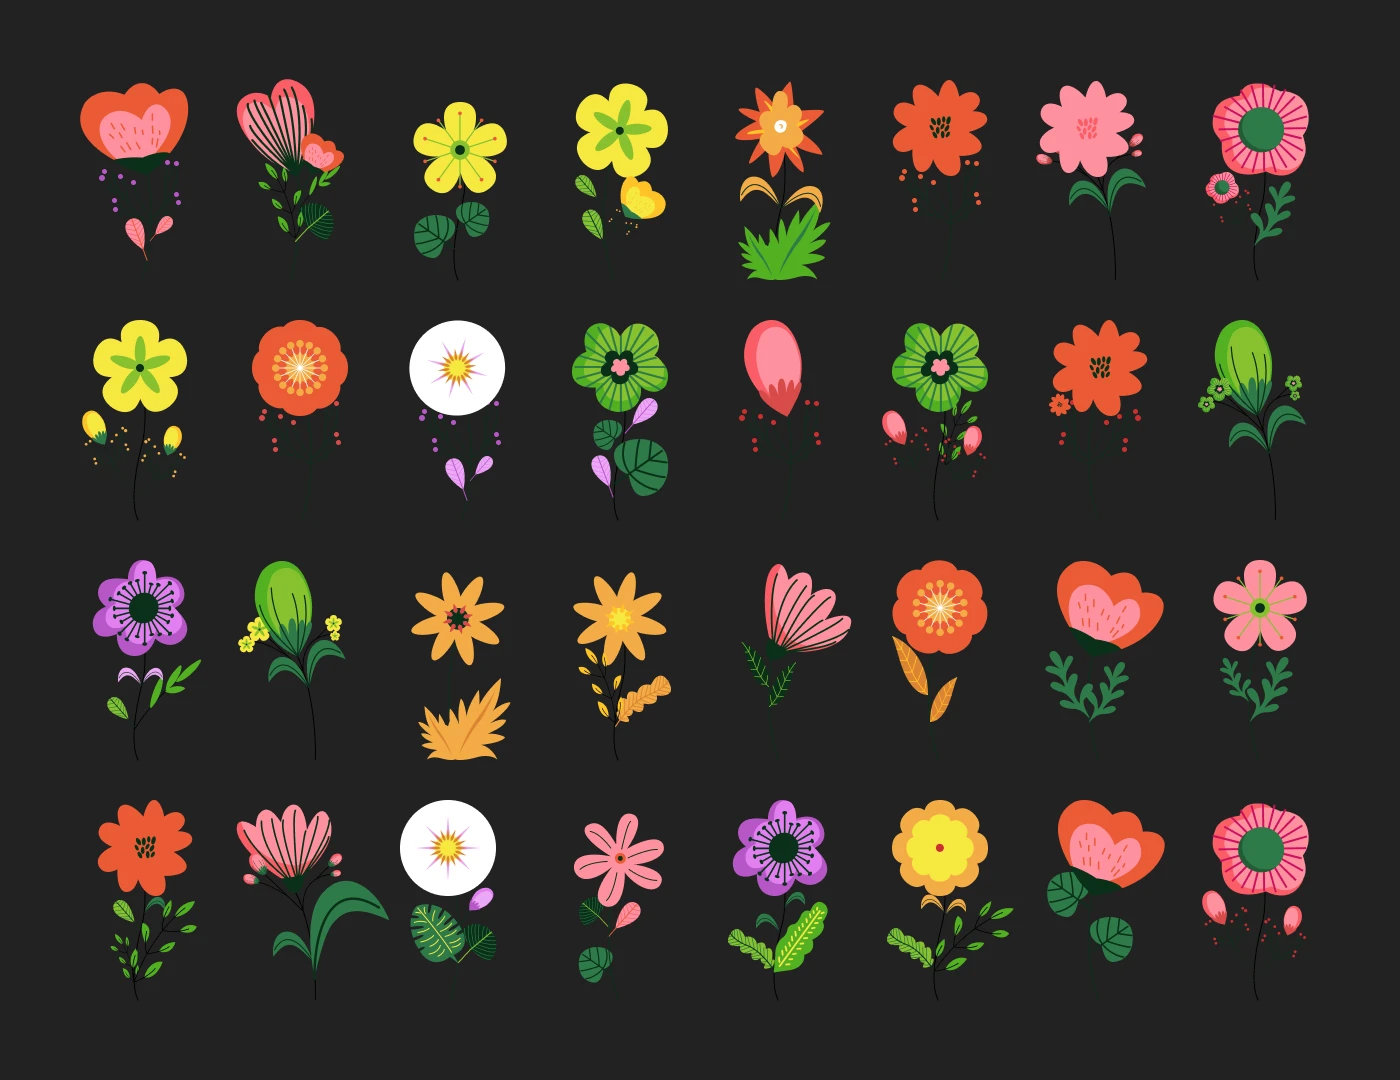 Flower Patterns Free Illustration for Figma - Flower patterns with variant allow you to use them anywhere. Vector file, you can edit shape, color and size.